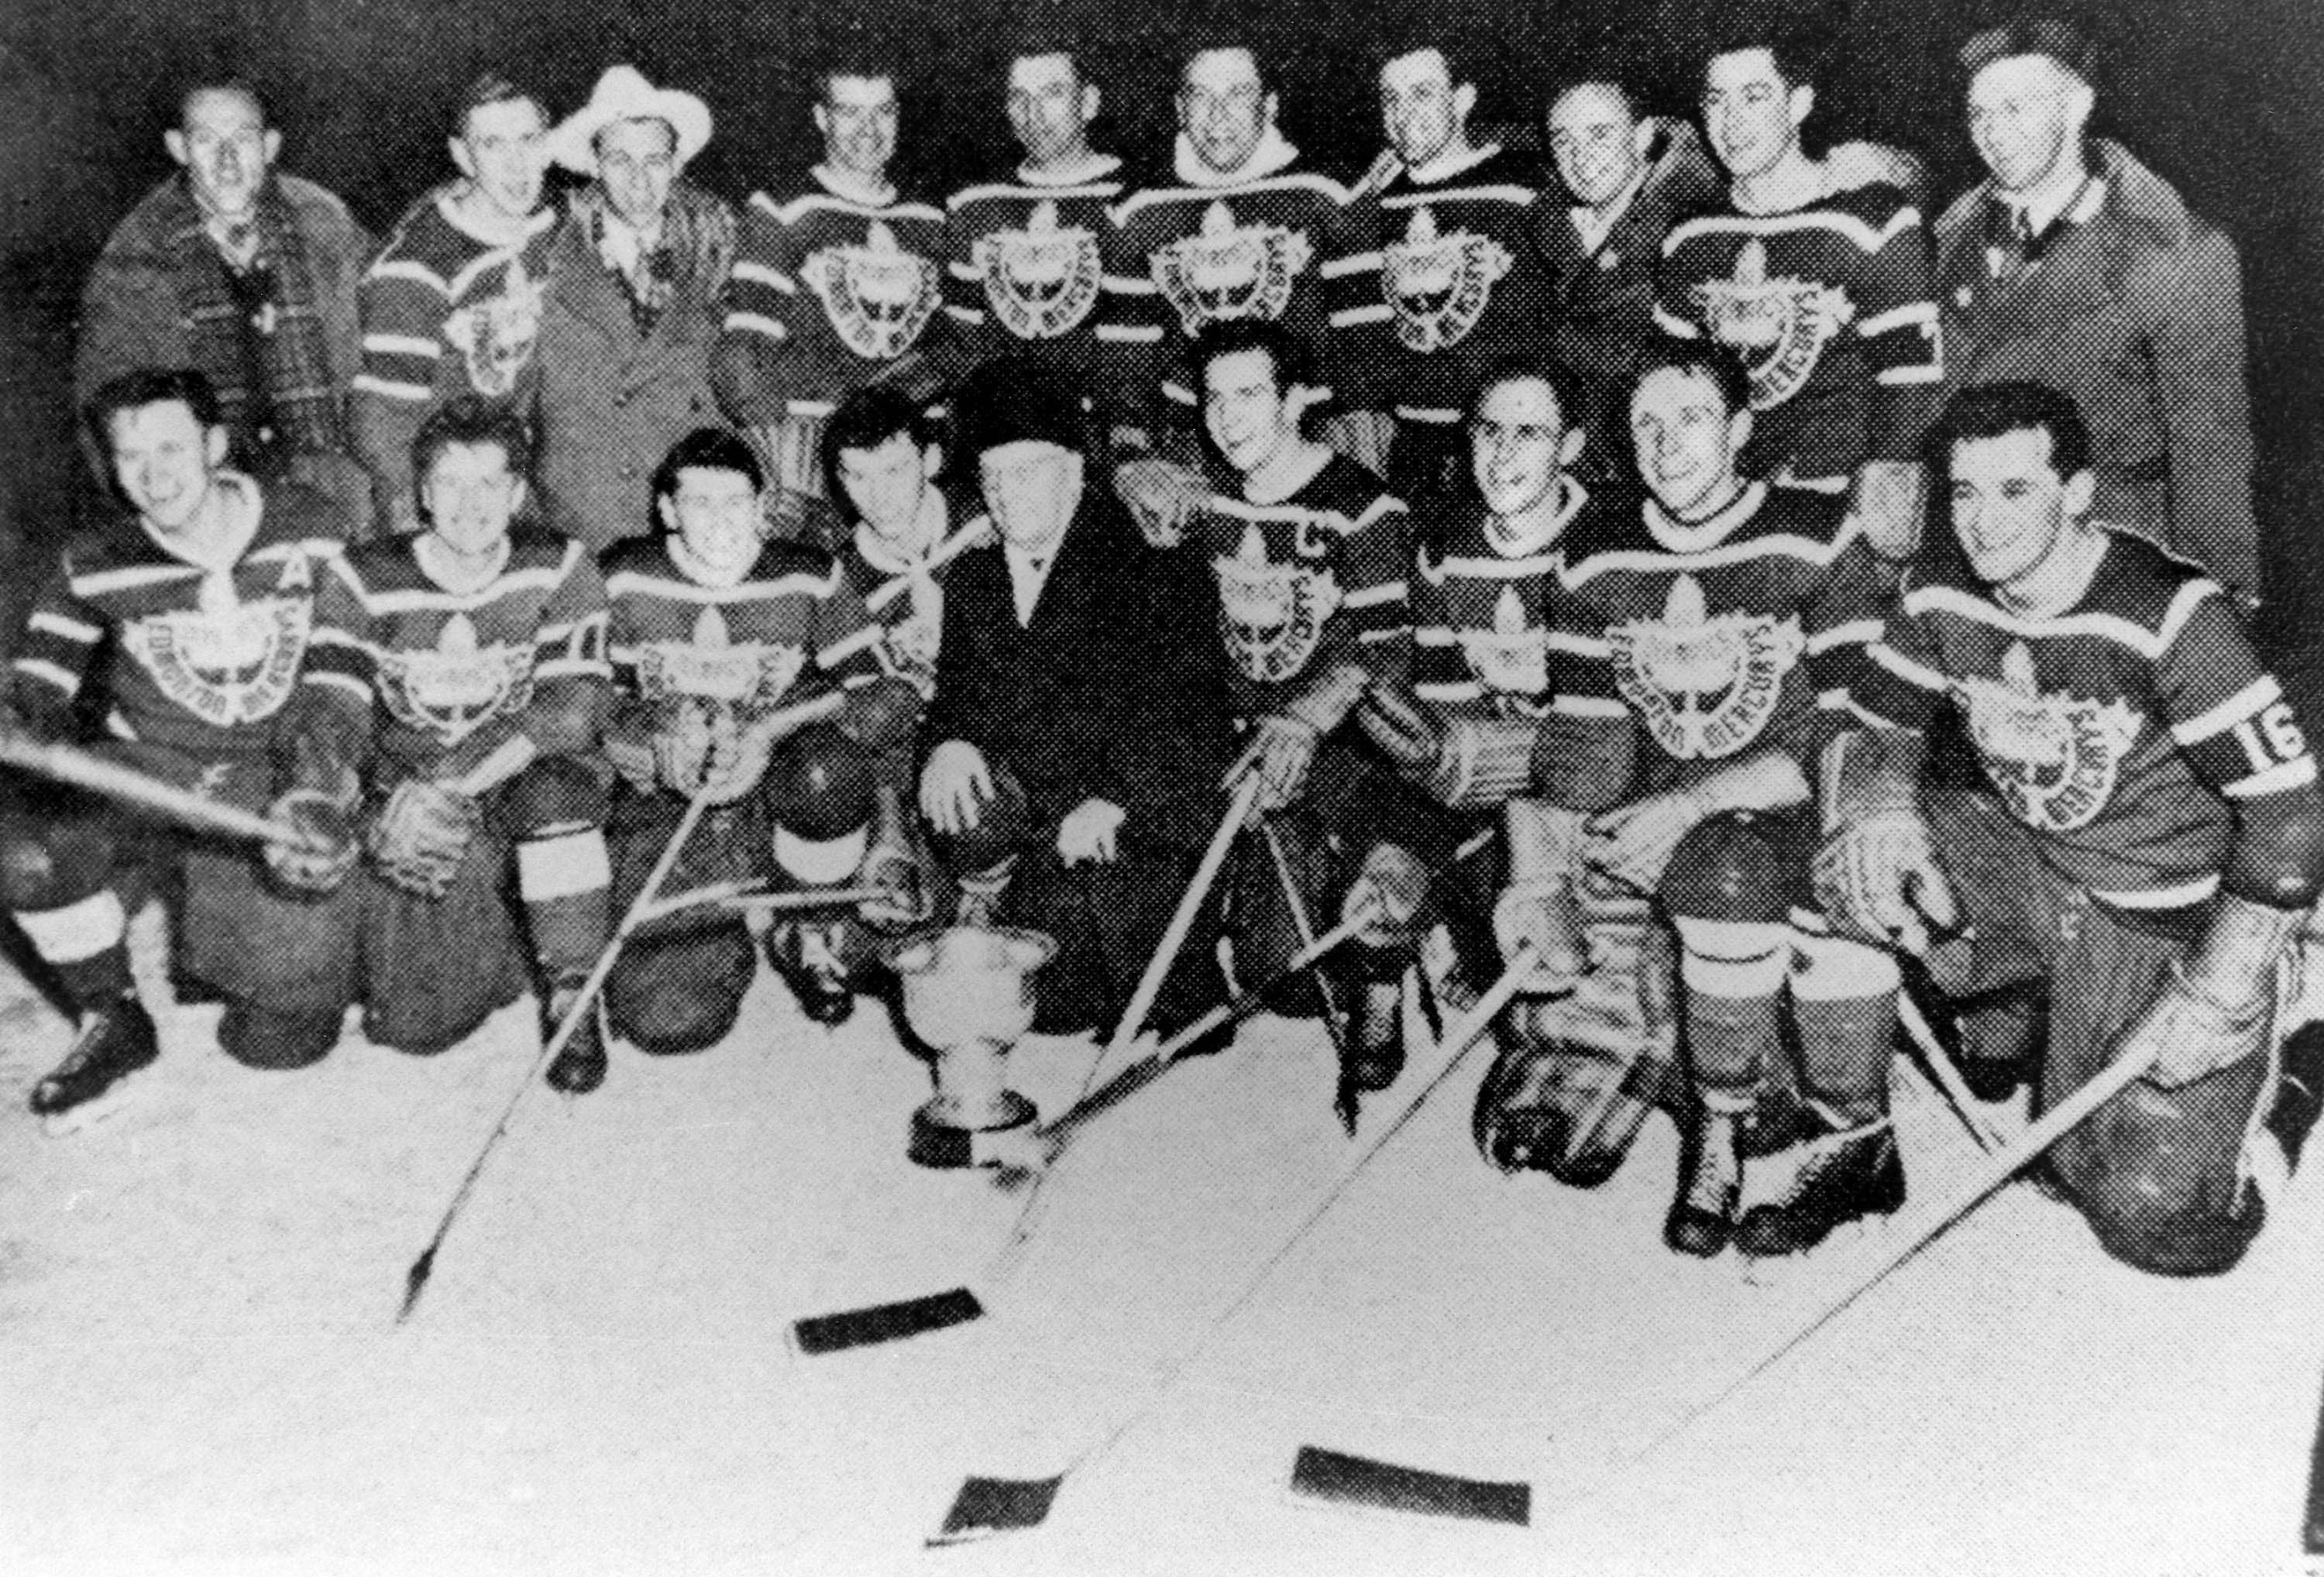 Canada's hockey team, represented by the Edmonton Mercurys, celebrates its gold medal win at the Oslo 1952 Olympic Winter Games. (CP Photo/COC)